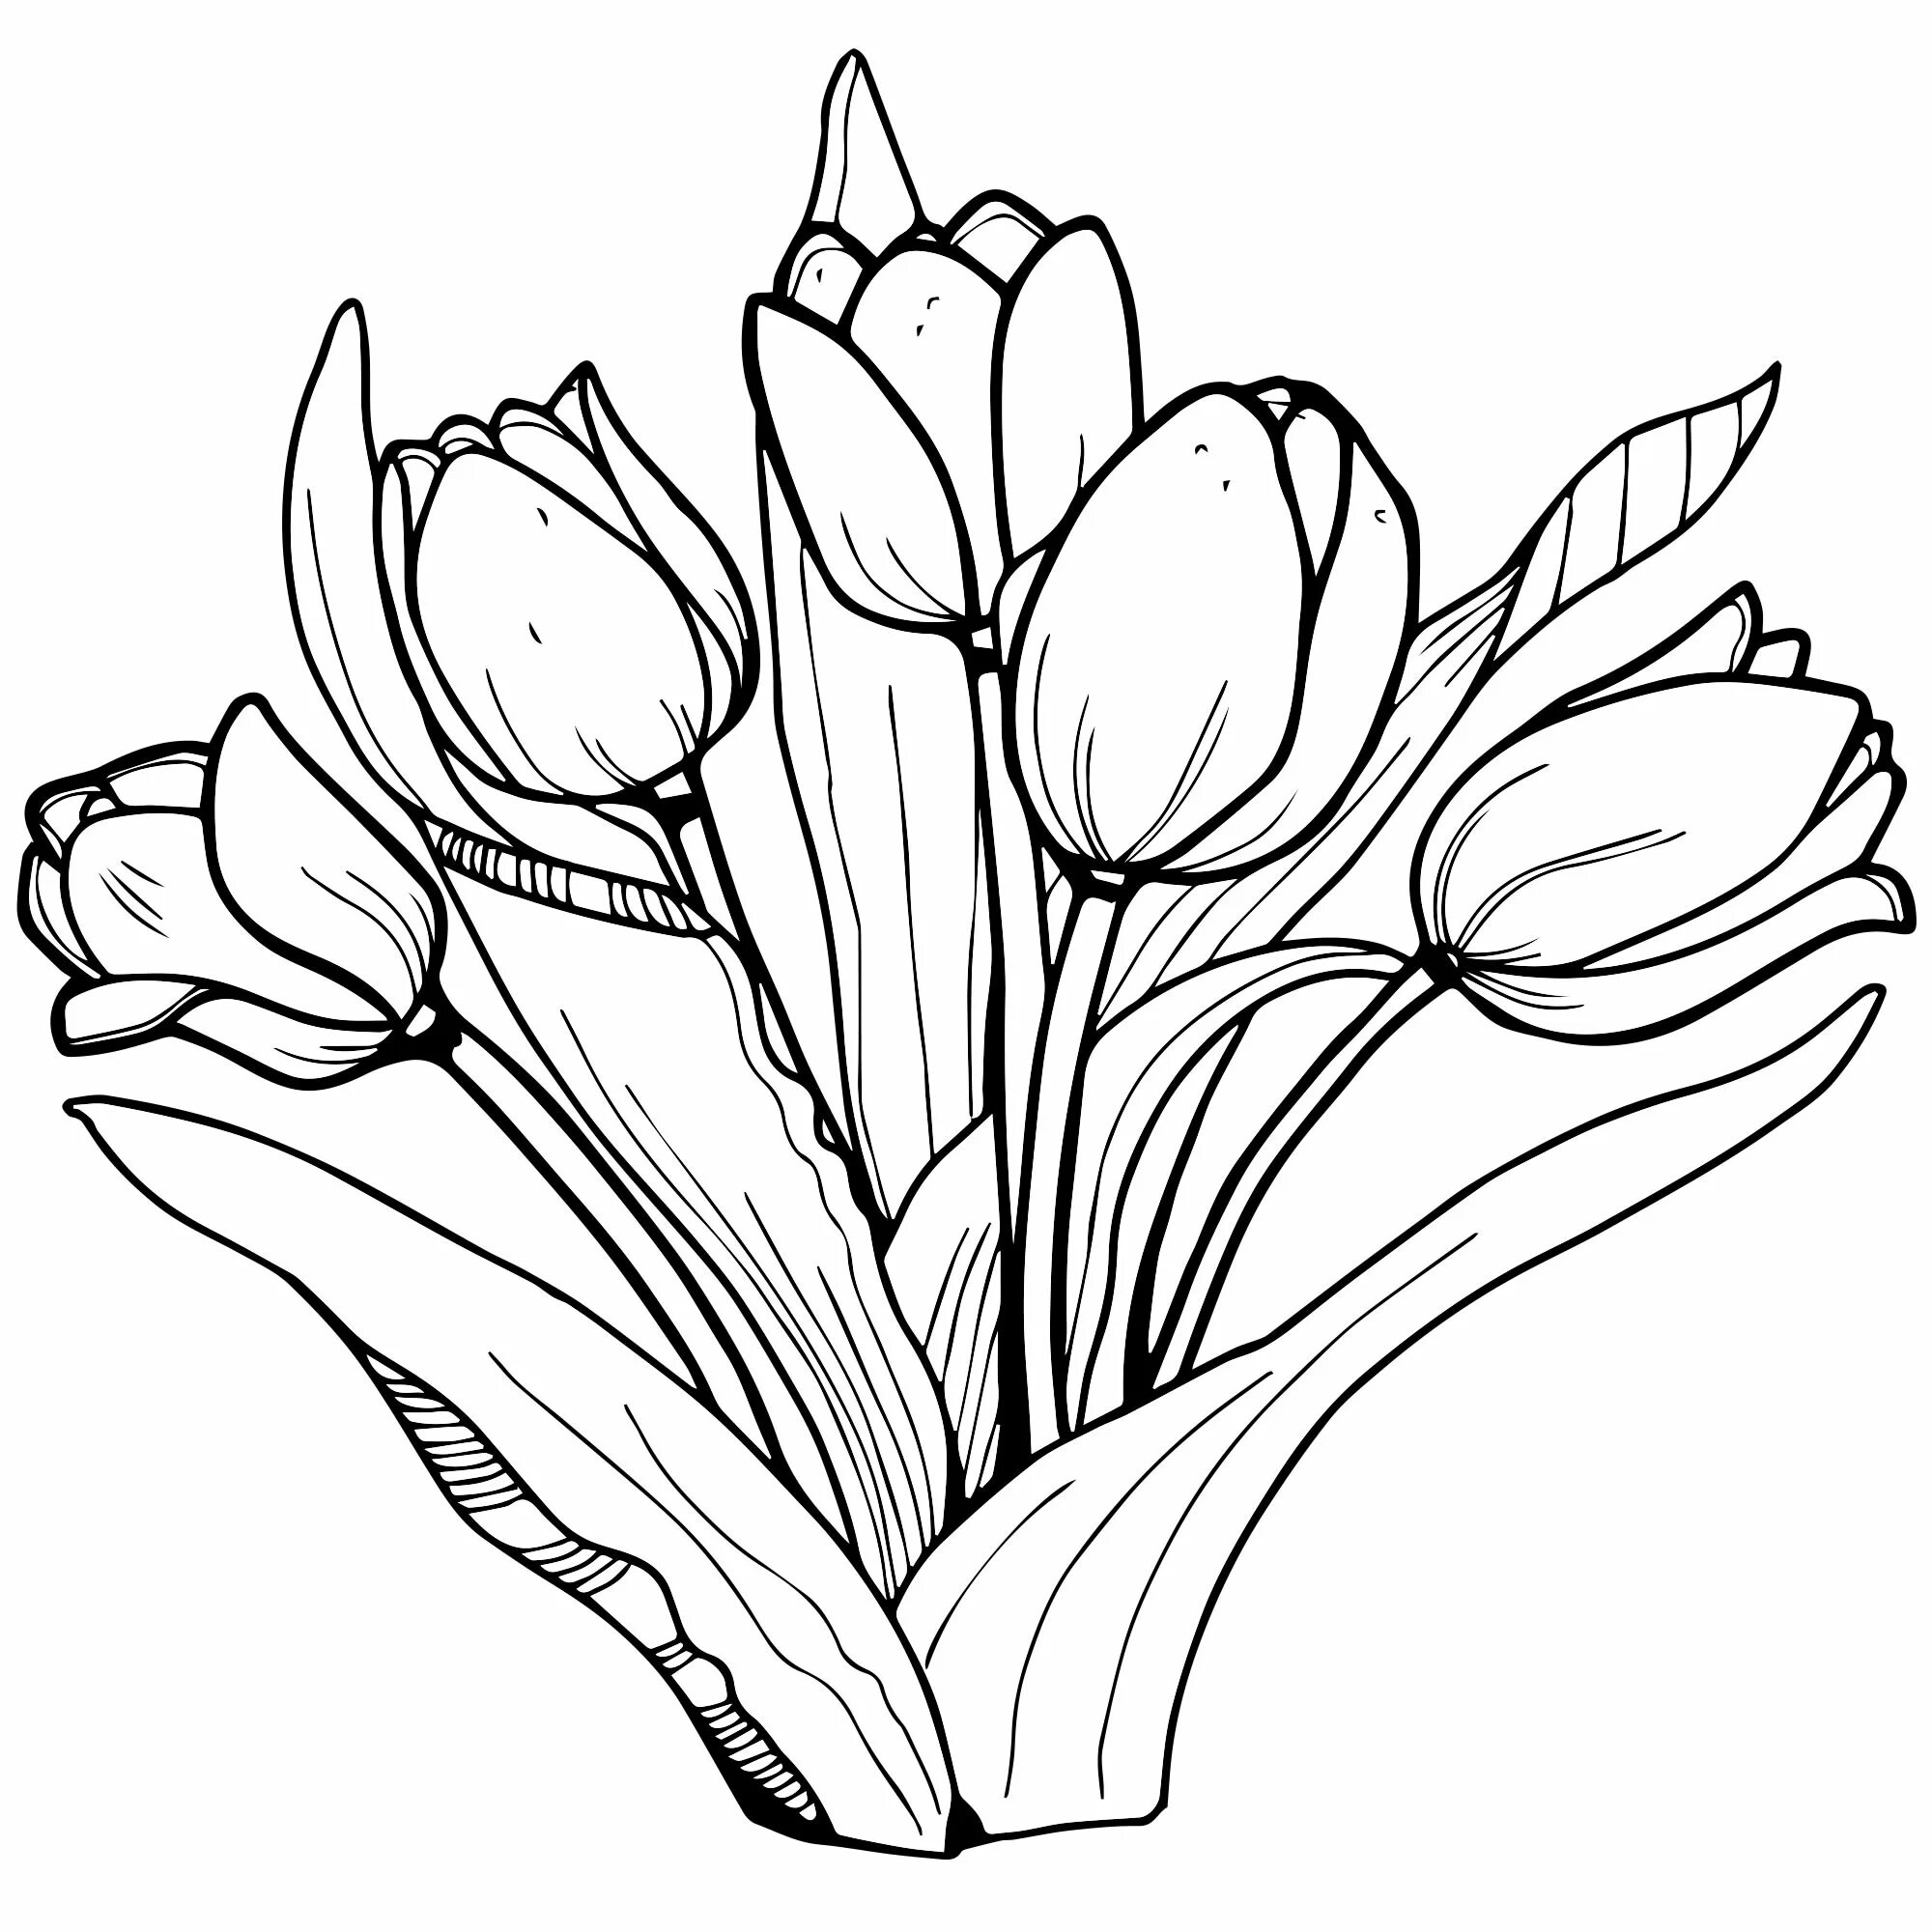 Coloring for bright tulips for children 5-6 years old